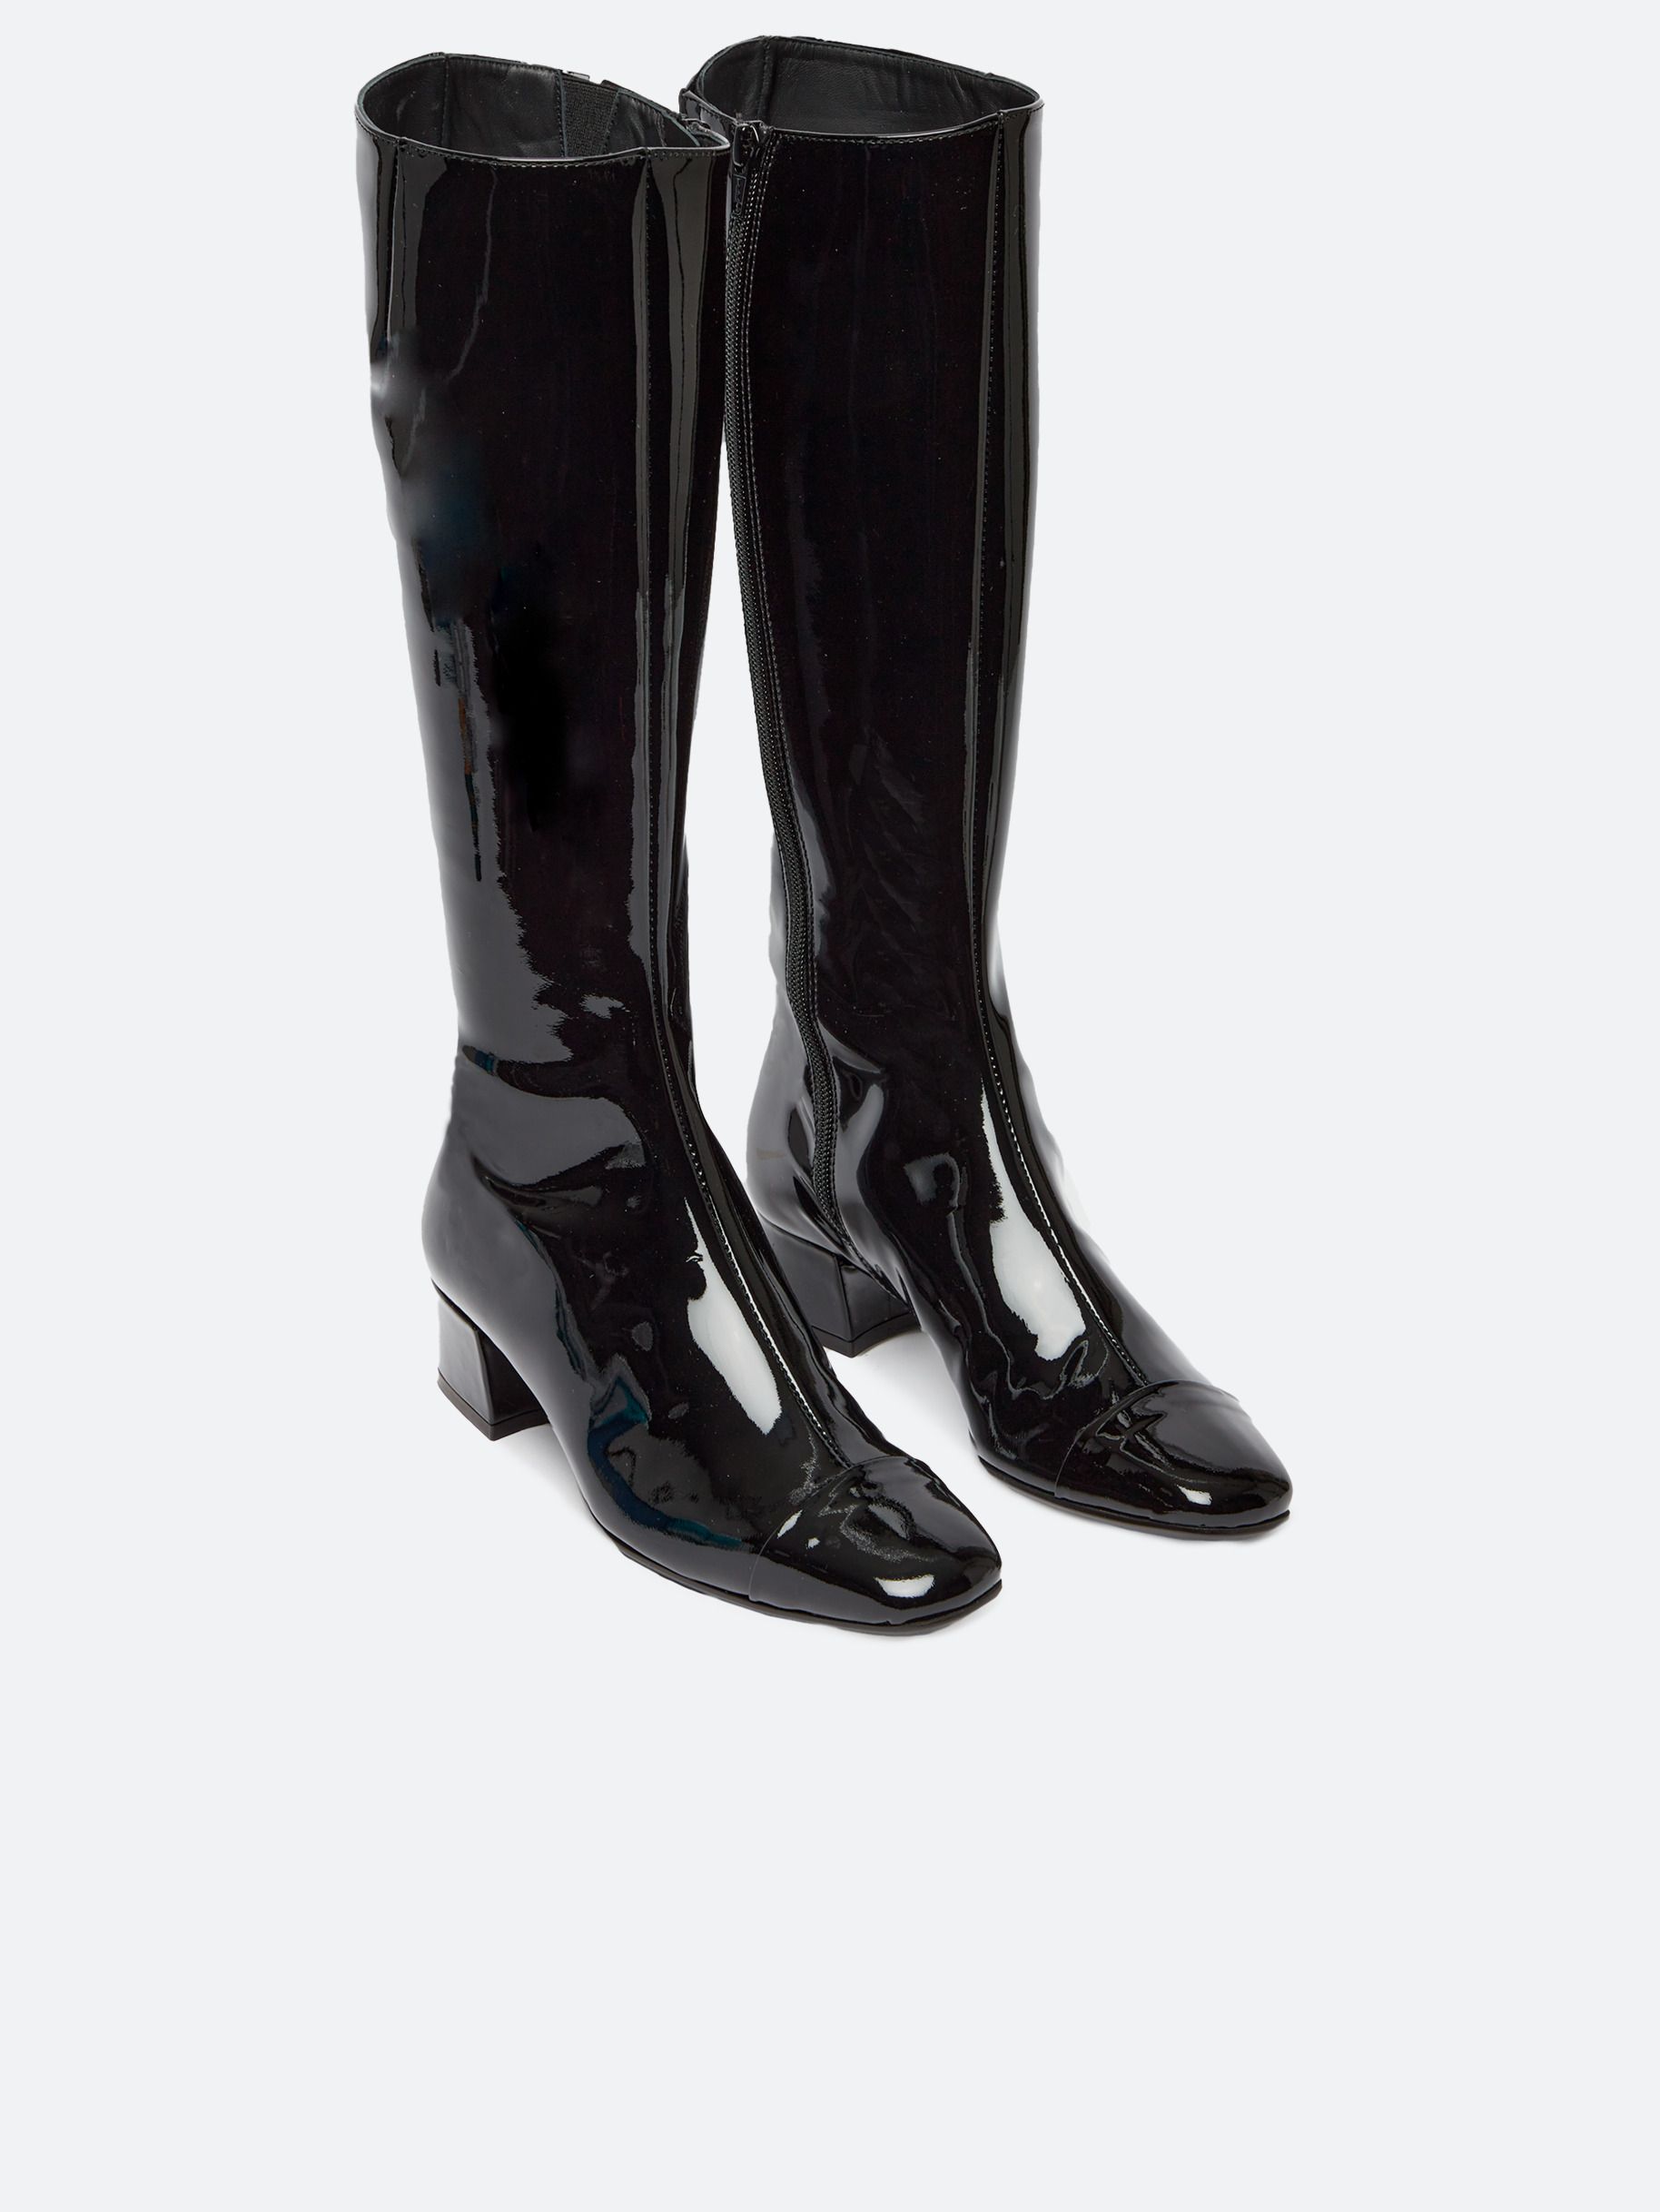 black patent boots knee high